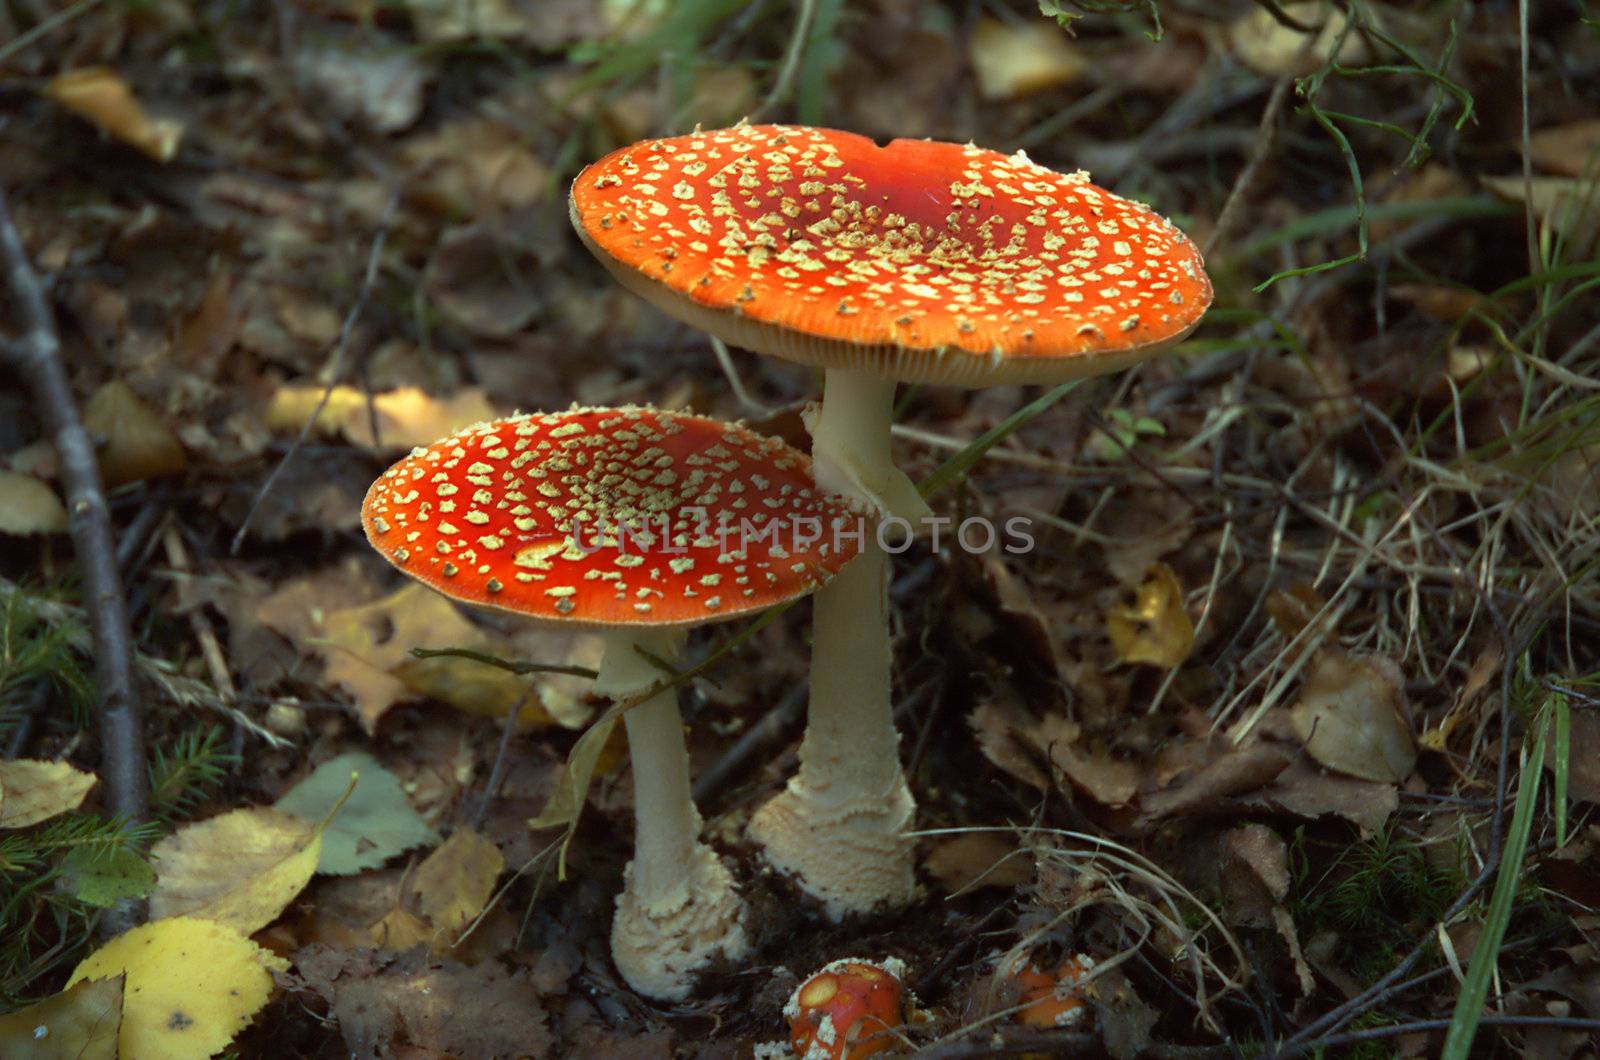 Big and smaller fly agaric mushrooms on autumn forest bed